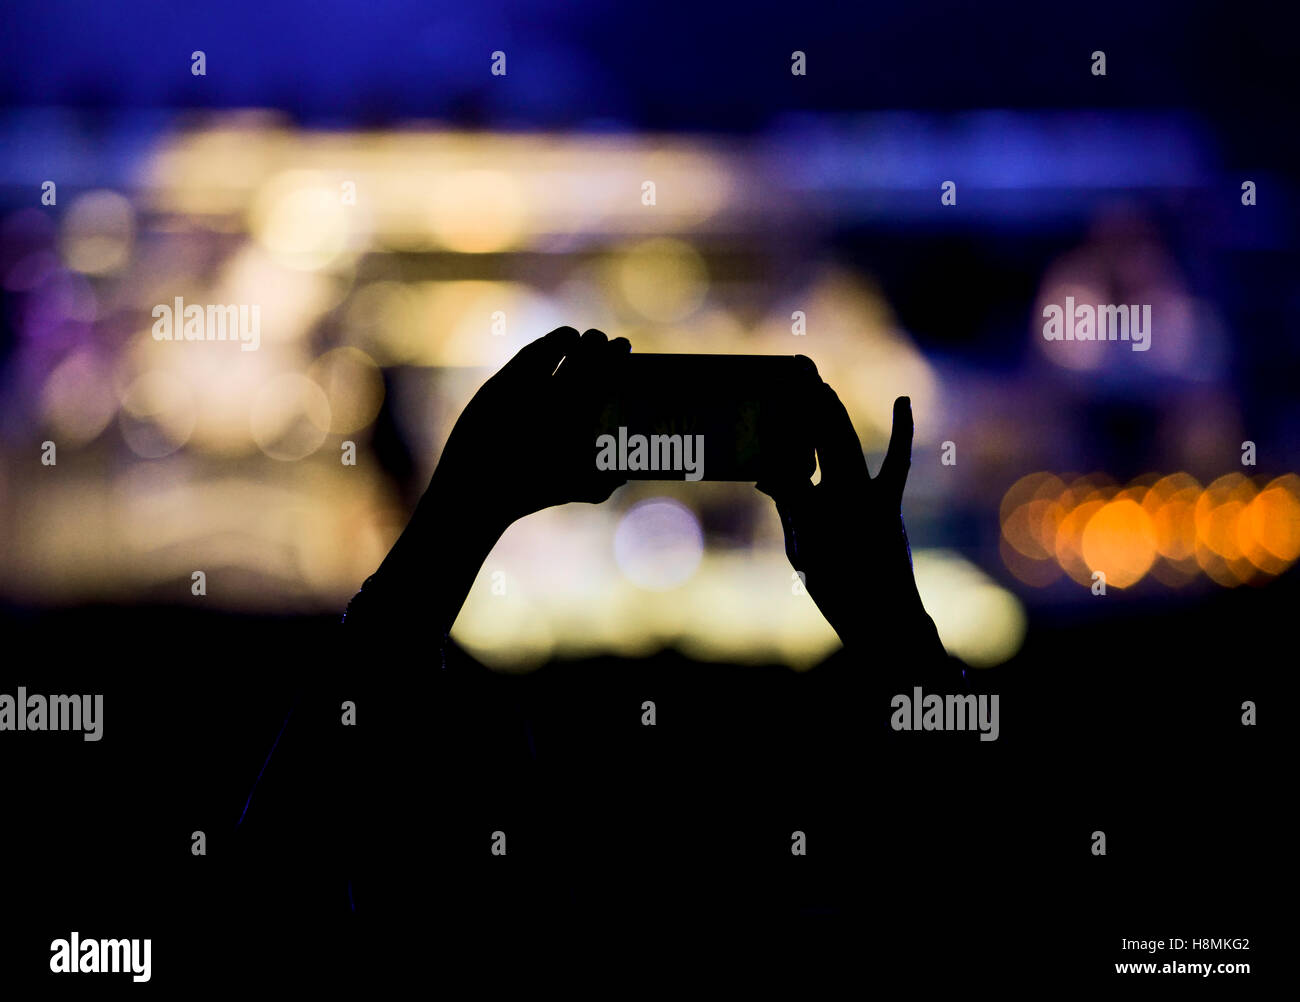 Concert stage with silhouetted hands raised holding camera phone Stock Photo